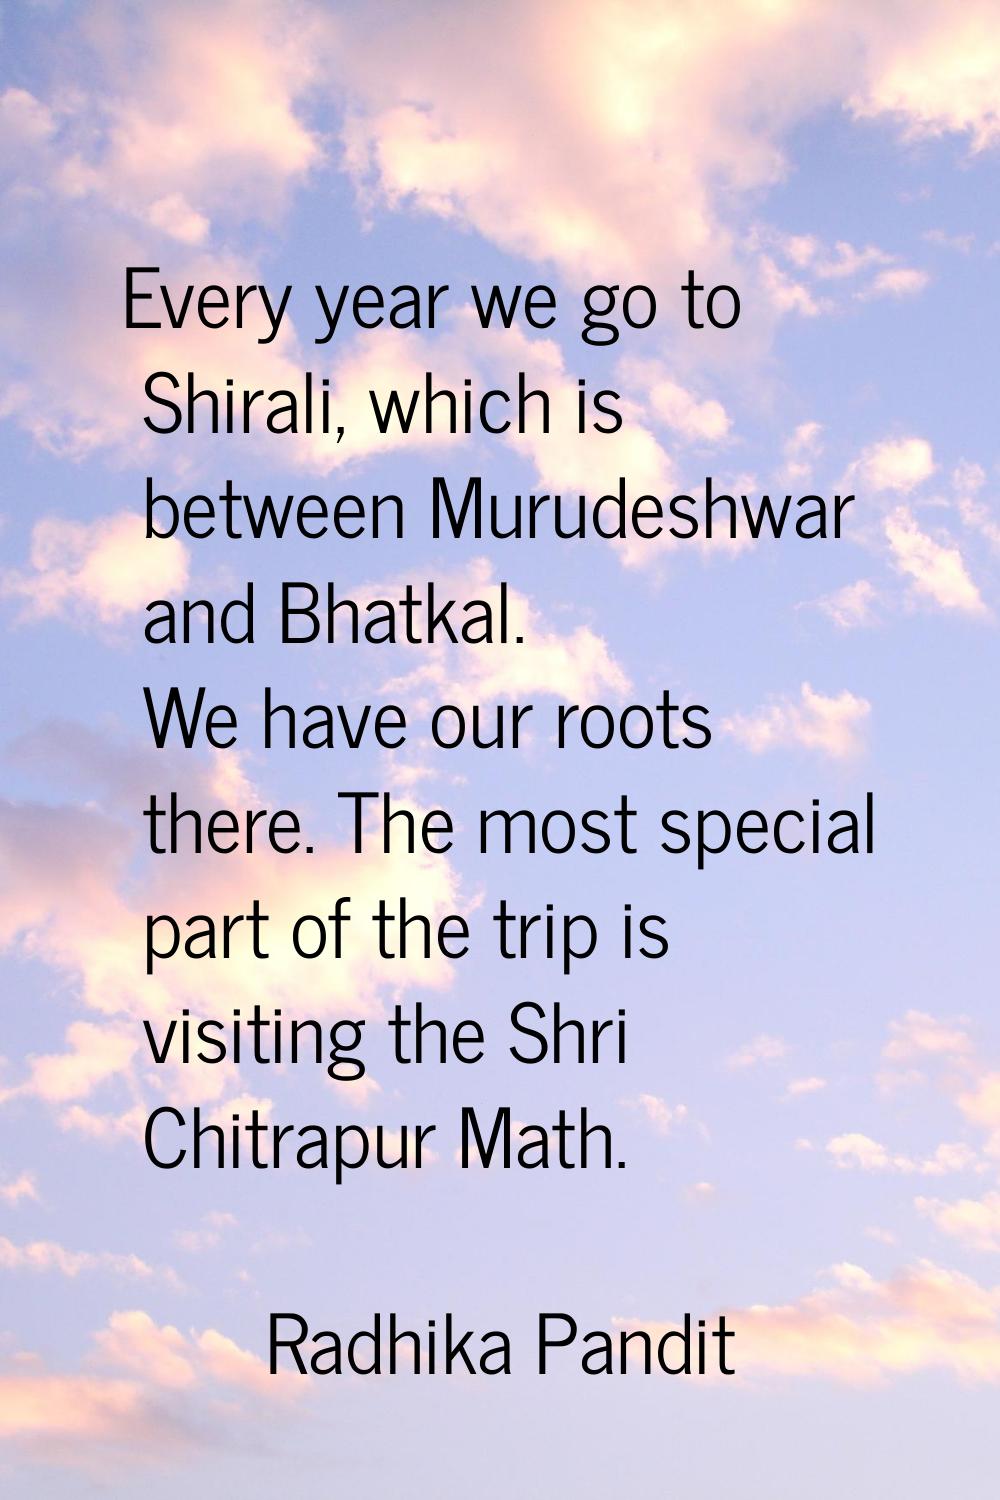 Every year we go to Shirali, which is between Murudeshwar and Bhatkal. We have our roots there. The